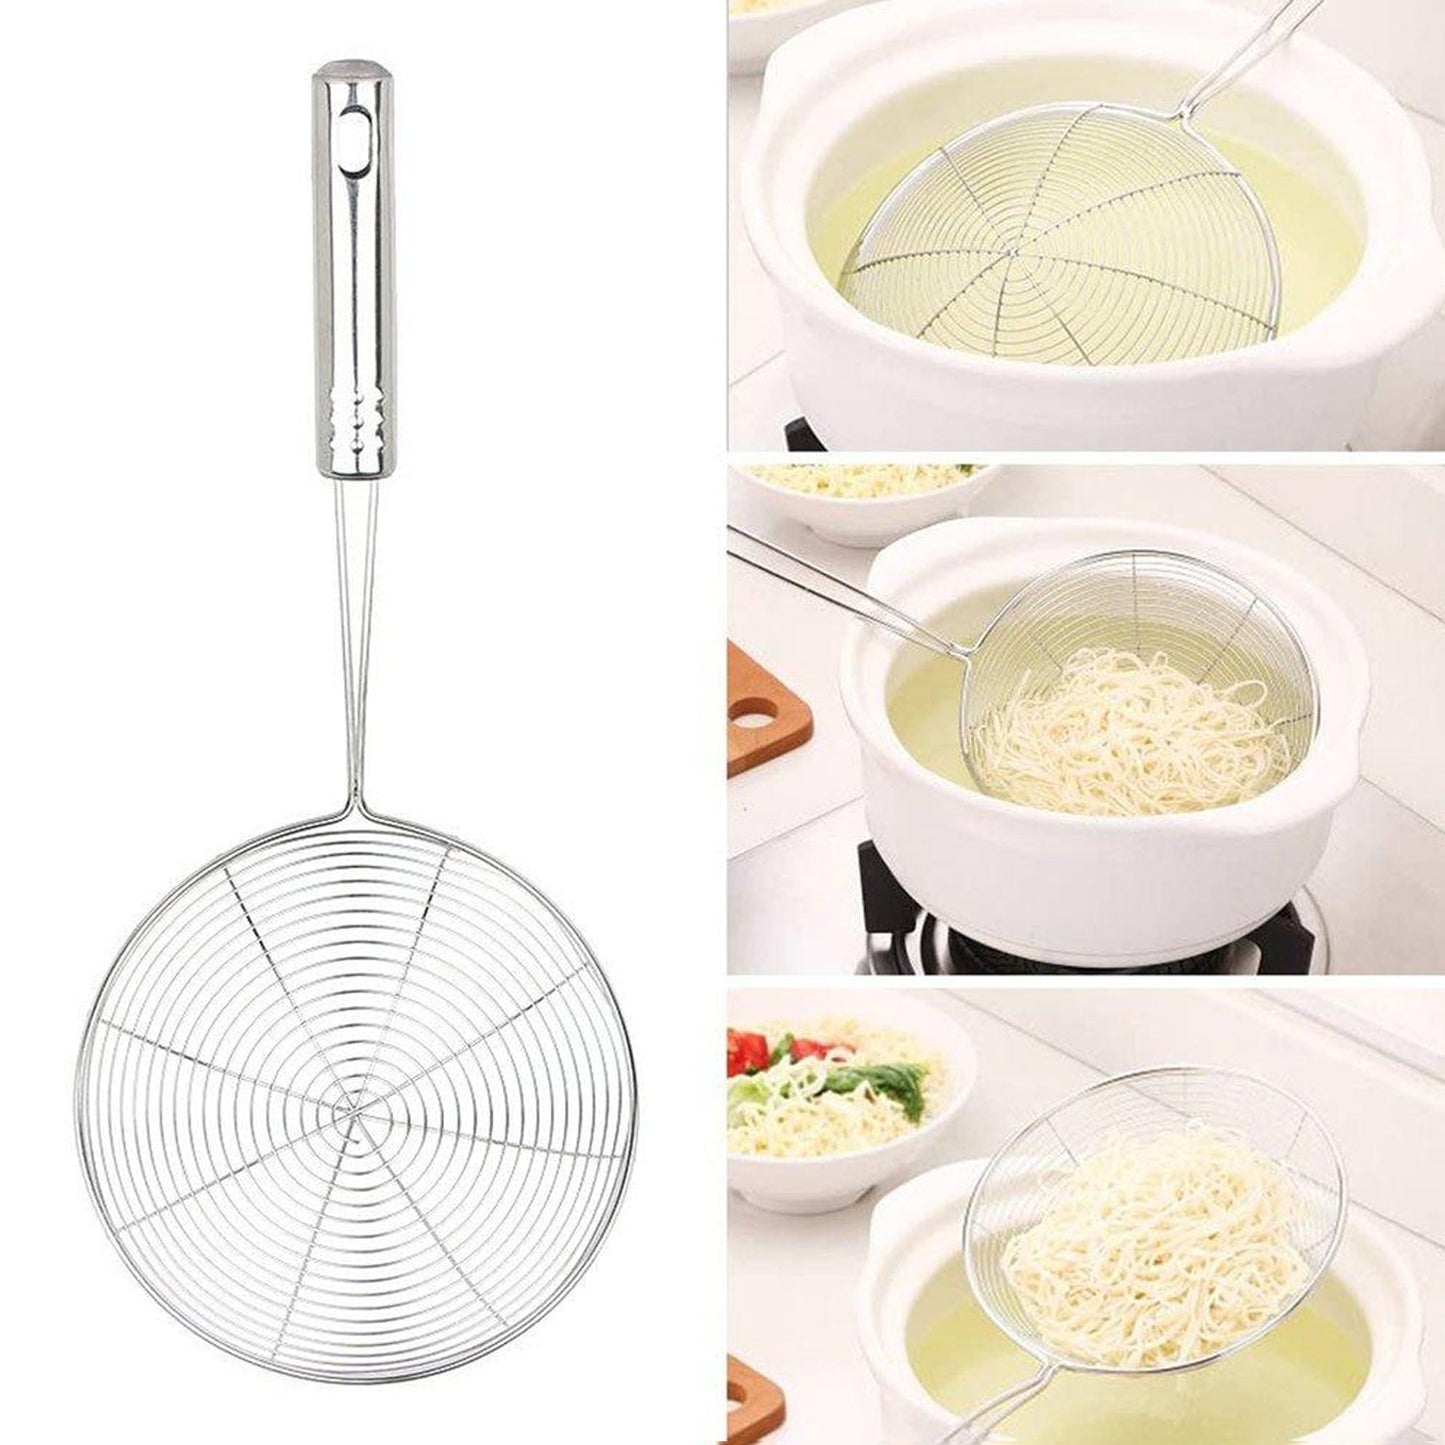 2727 Mini Oil Strainer To Get Perfect Fried Food Stuffs Easily Without Any Problem And Damage. DeoDap